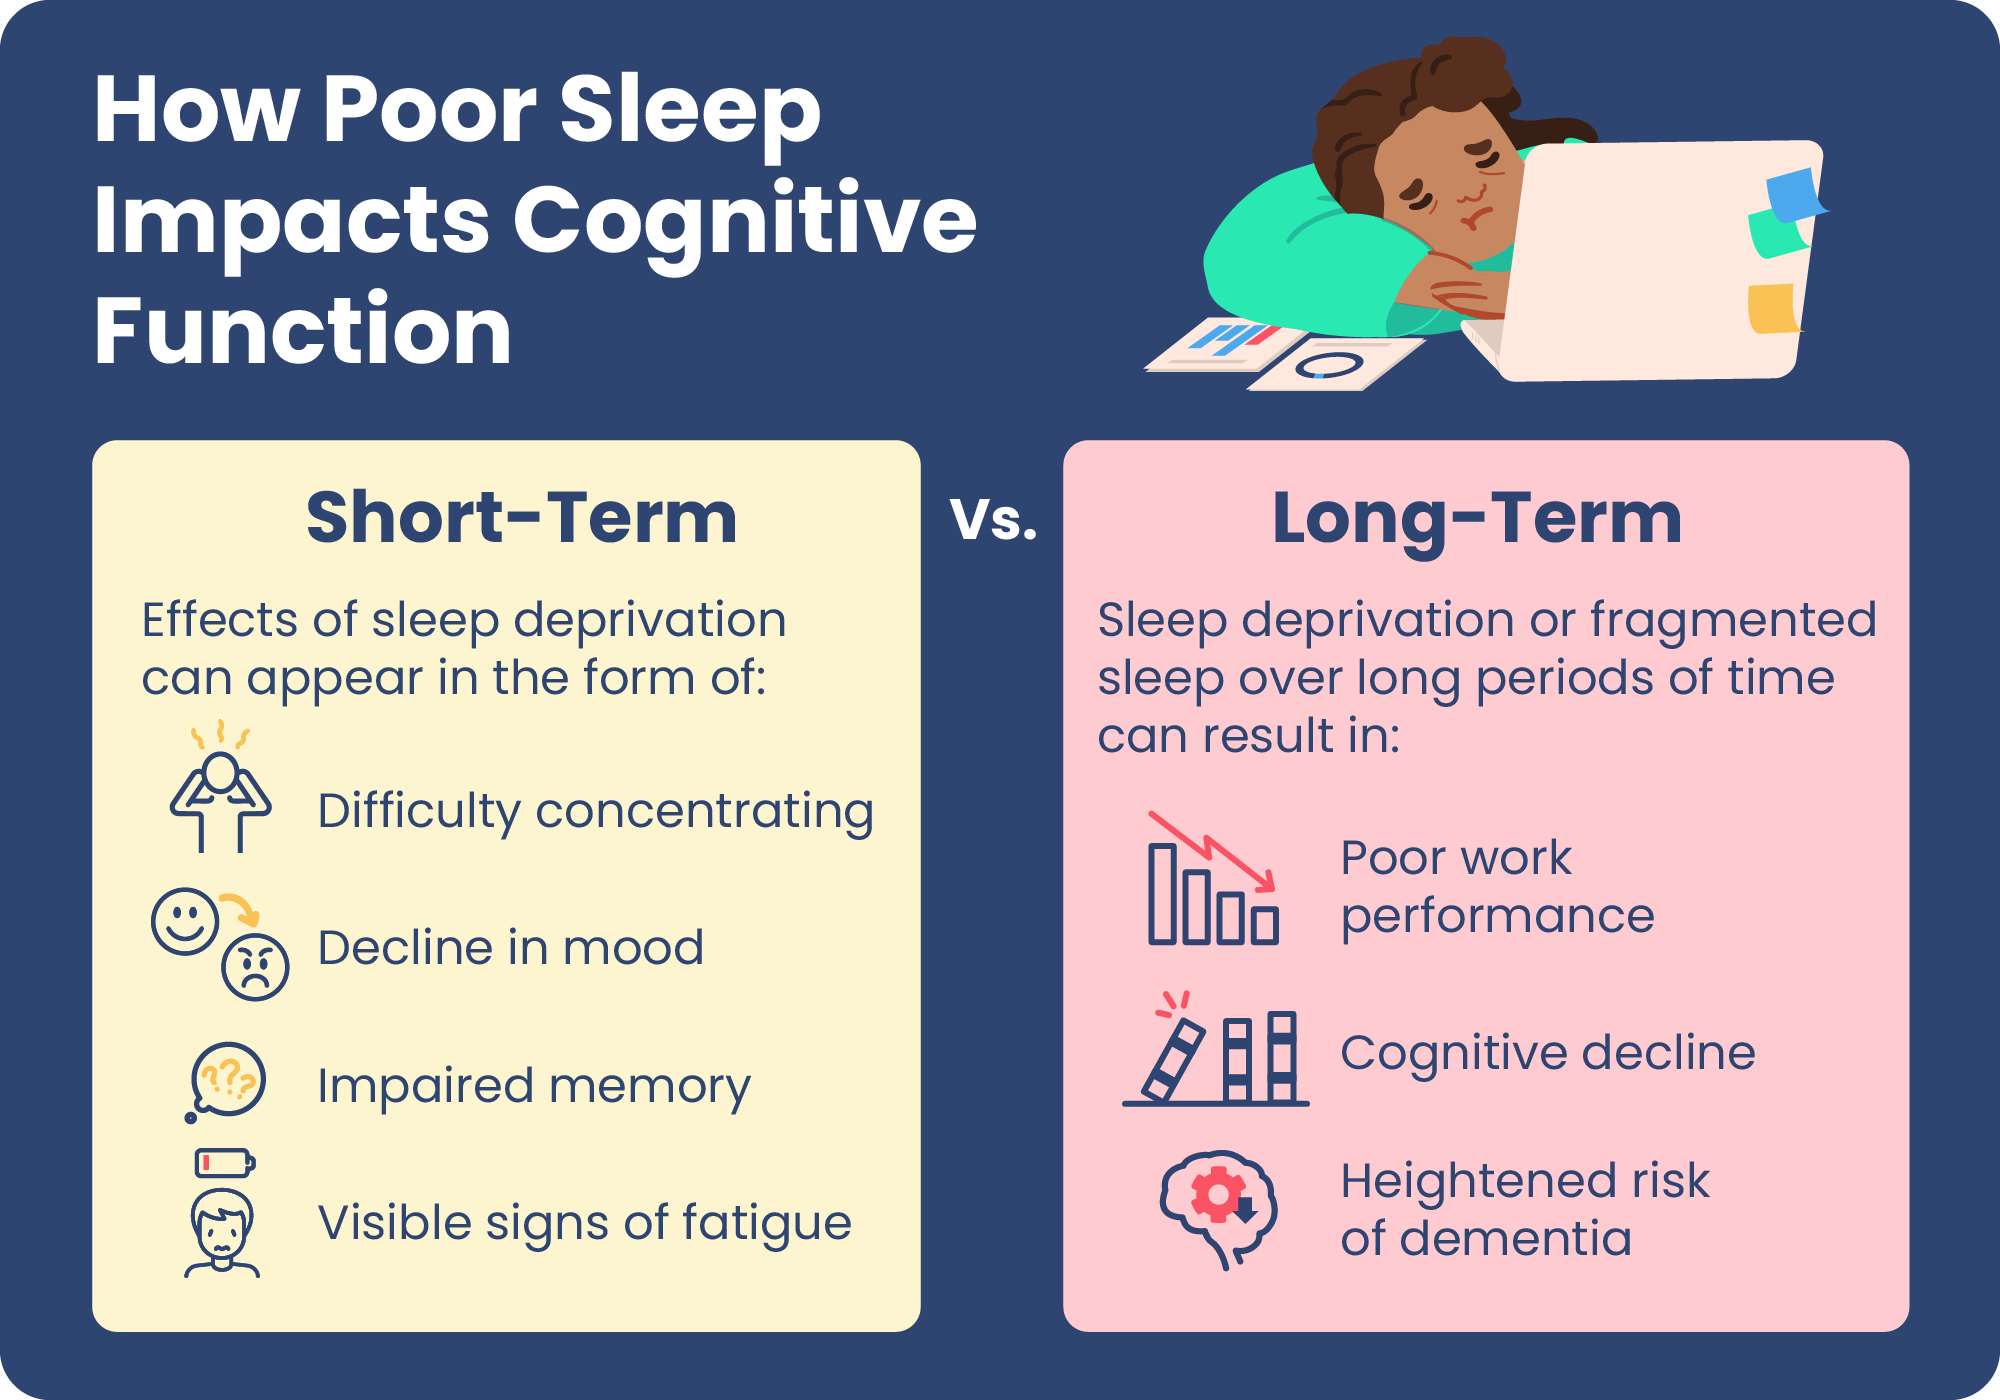 Graphic summarizing the short-term impacts of poor sleep compared to the long-term risk of cognitive decline and dementia.